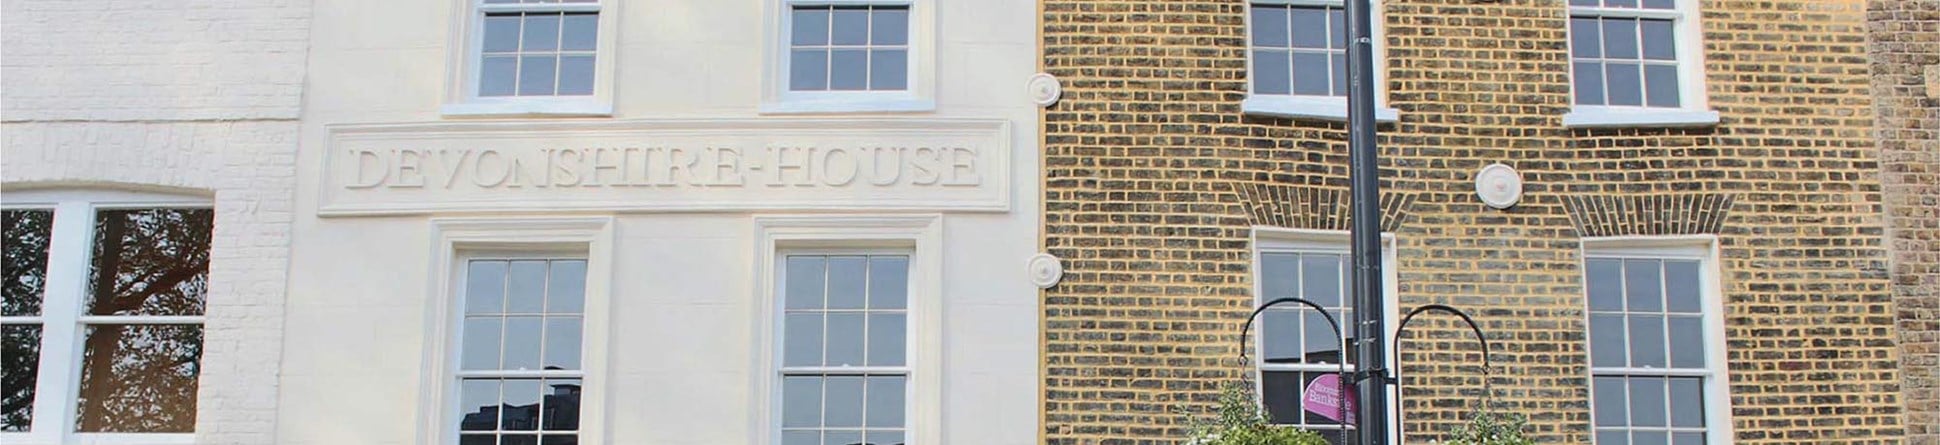 Front facade of Devonshire House